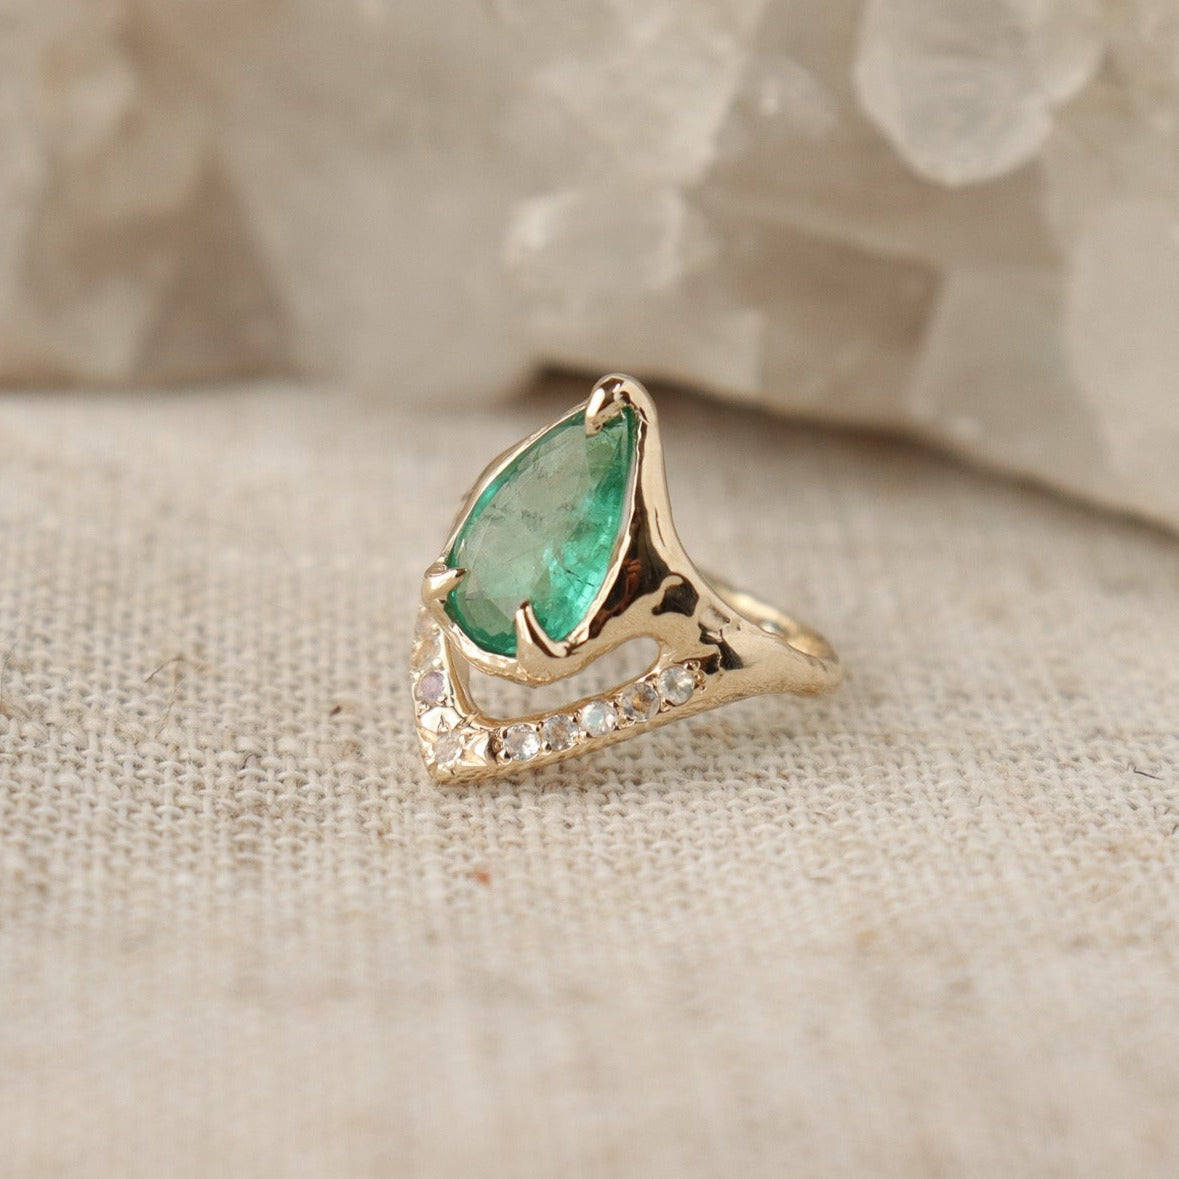 Close  up side view of a pear shaped emerald is set with prongs and has a V-shape band under the stone with moonstones.